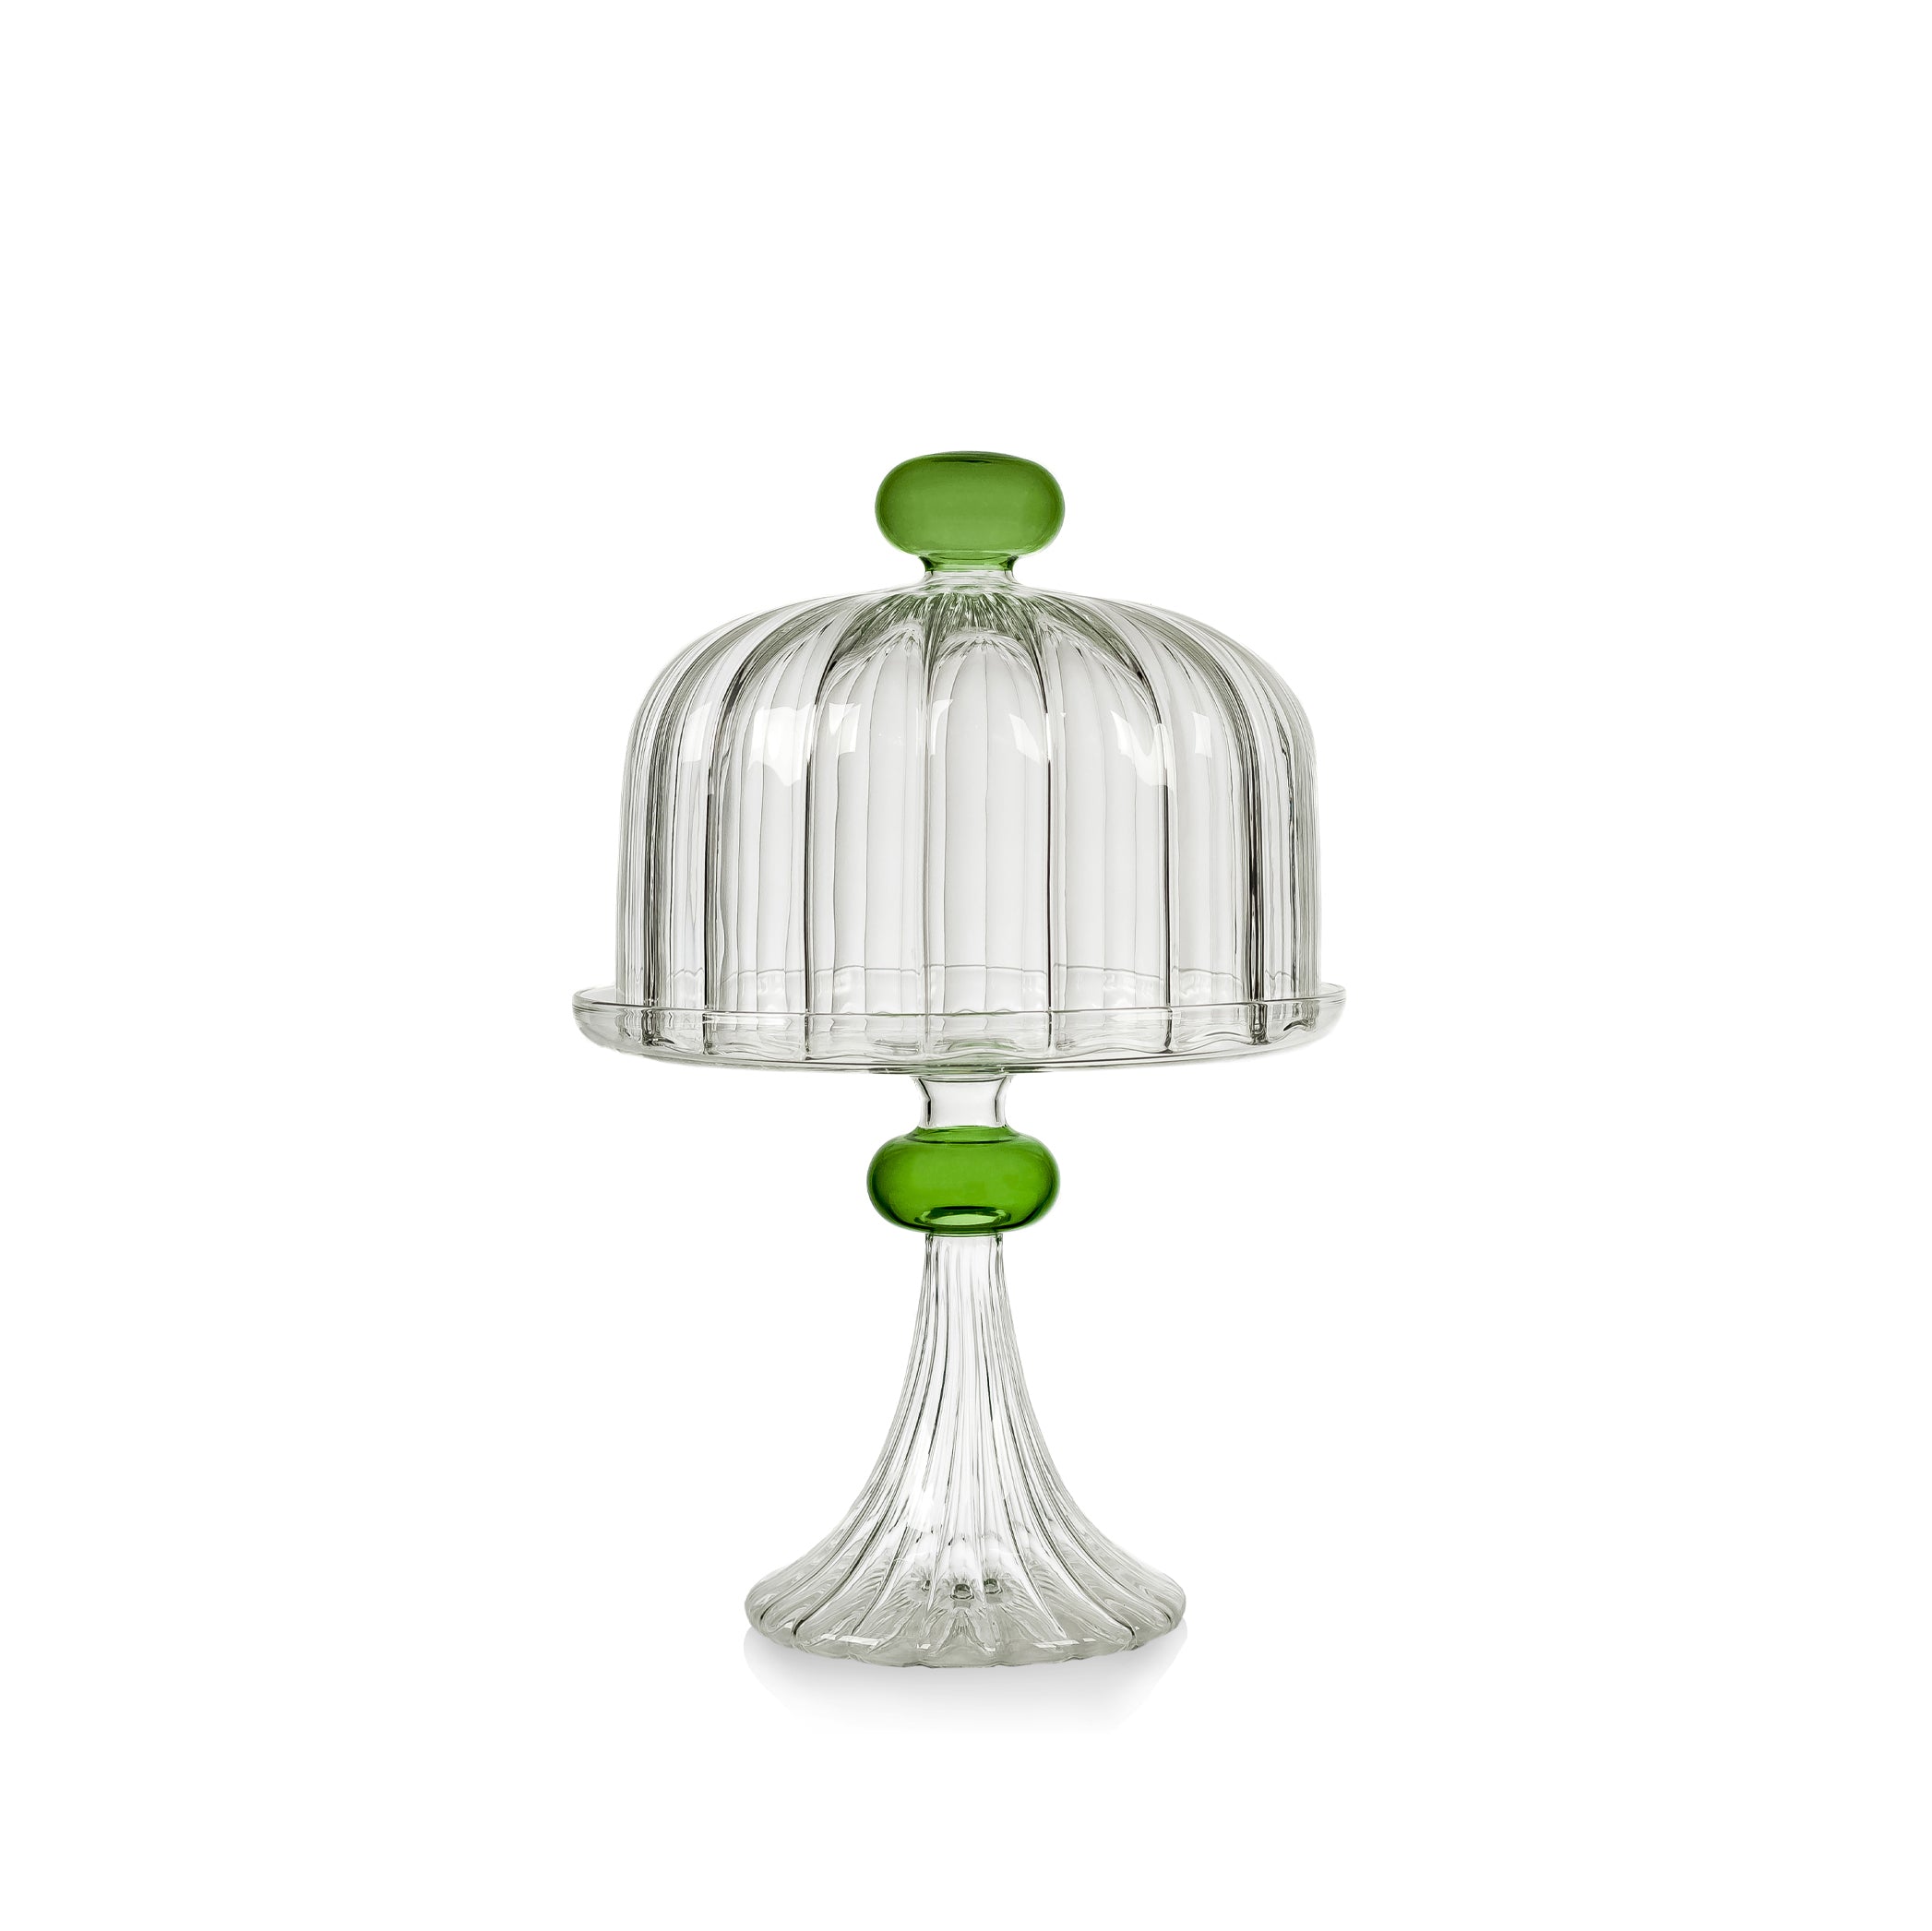 Verona Cake Stand and Dome in Green, 25.5cm x 21cm